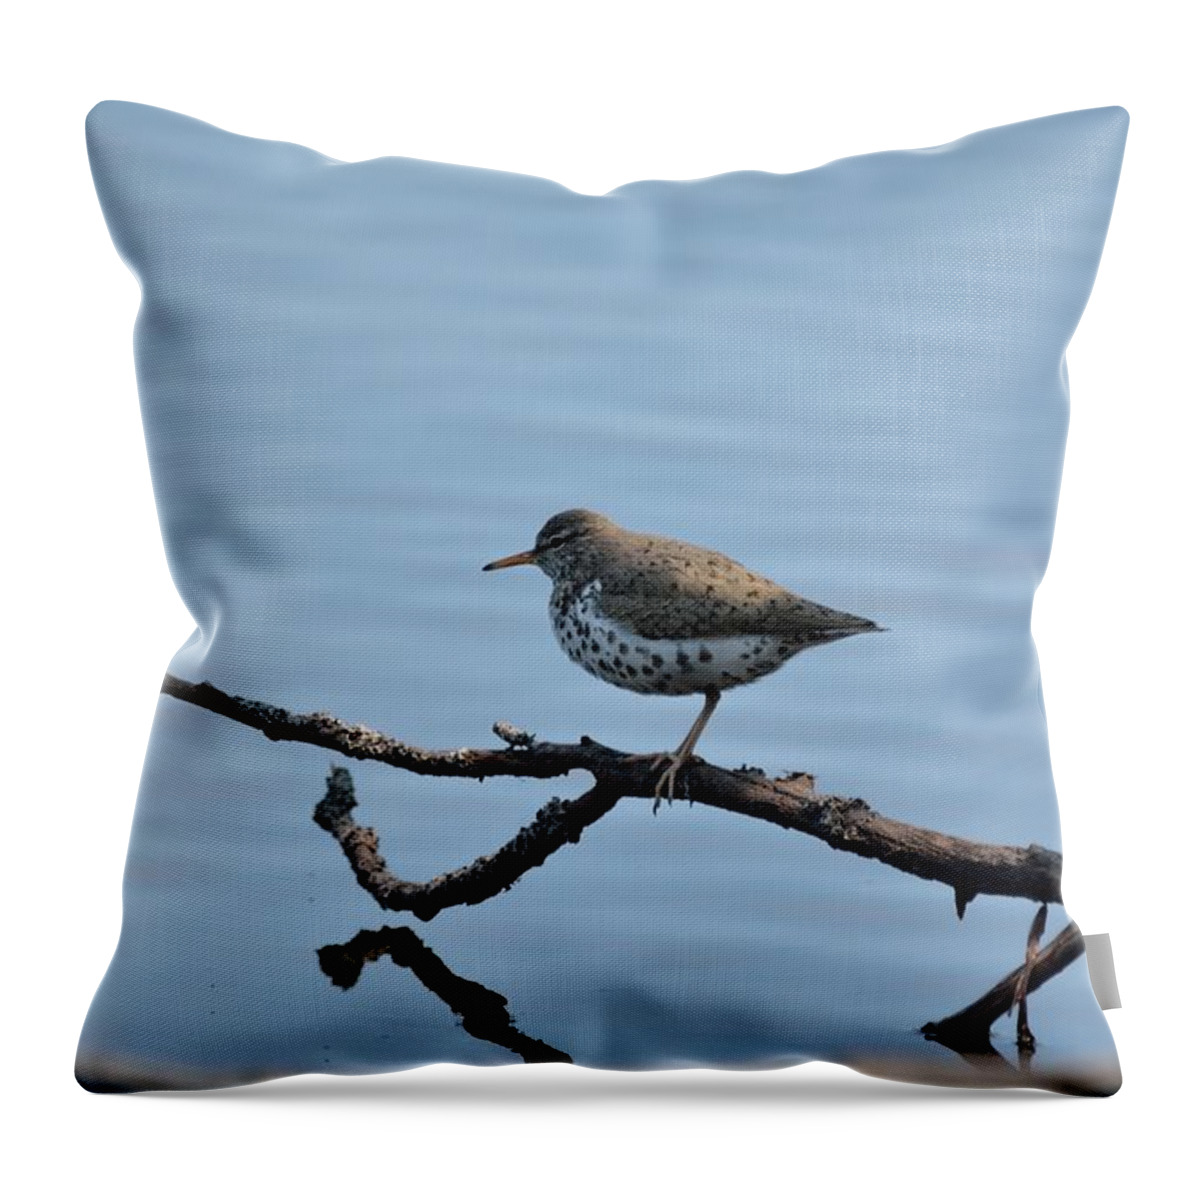 Spotted Sandpiper Throw Pillow featuring the photograph Spotted Sandpiper by David Porteus